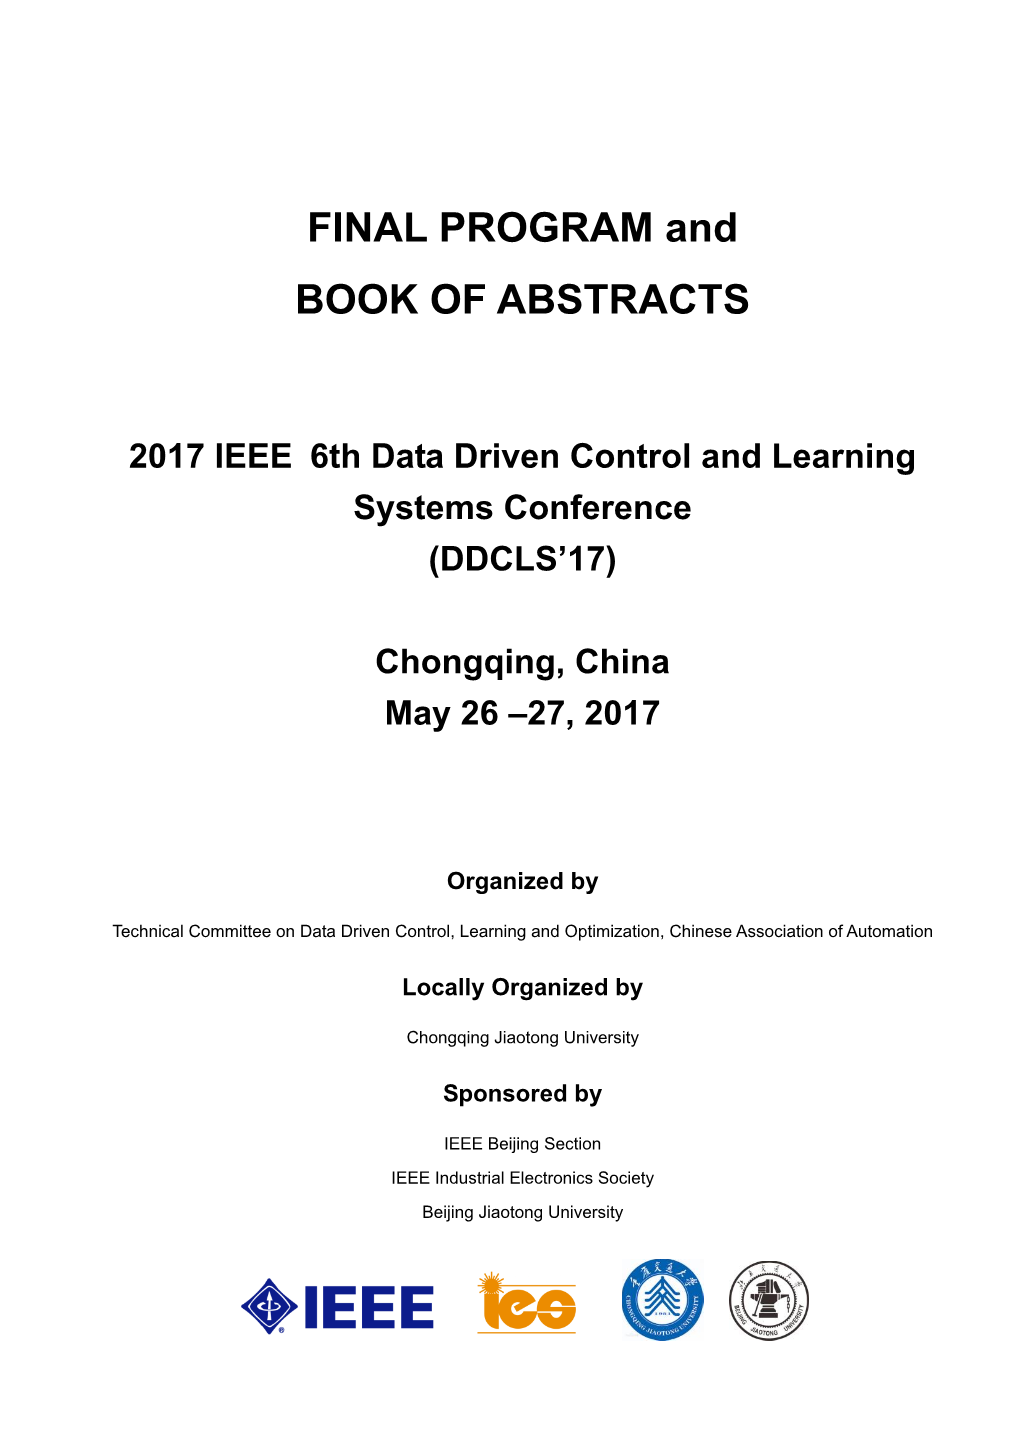 FINAL PROGRAM and BOOK of ABSTRACTS